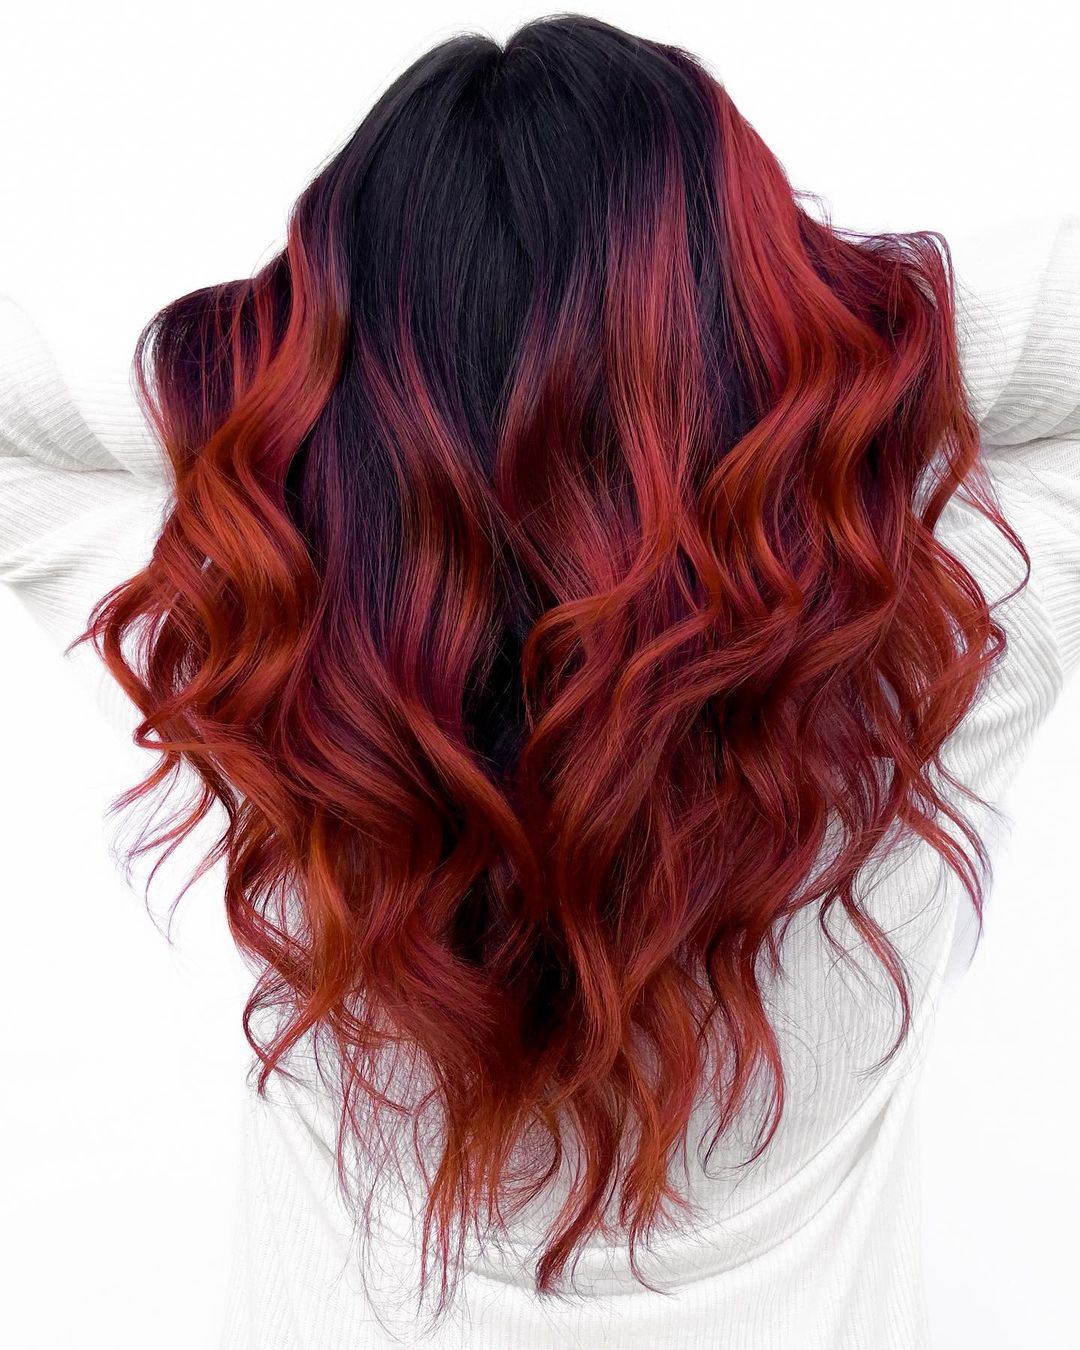 Black to Red Long Wavy Hair